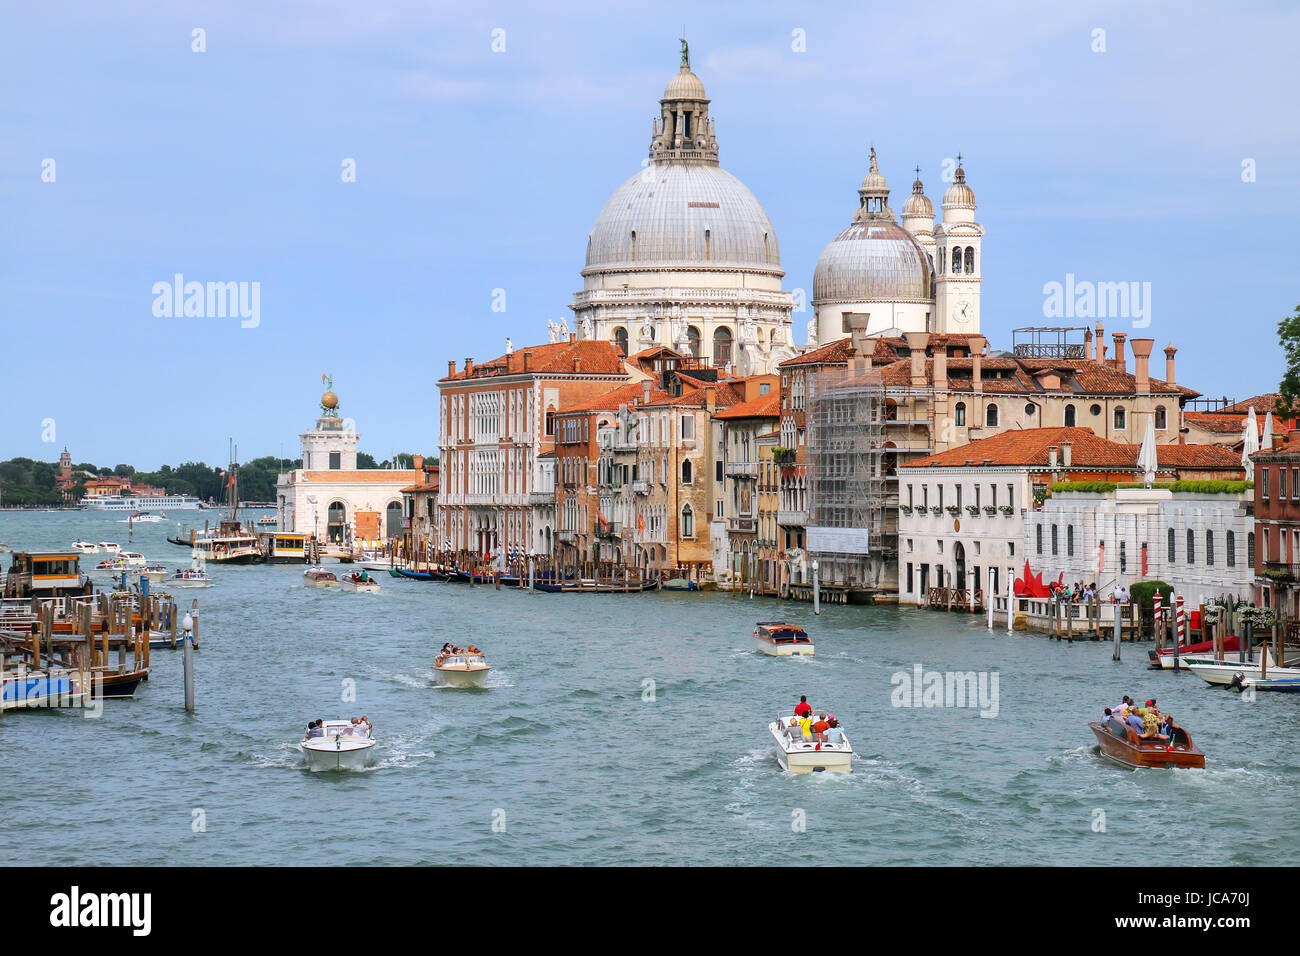 View of Grand Canal and Basilica di Santa Maria della Salute in Venice, Italy. Venice is situated across a group of 117 small islands that are separat Stock Photo